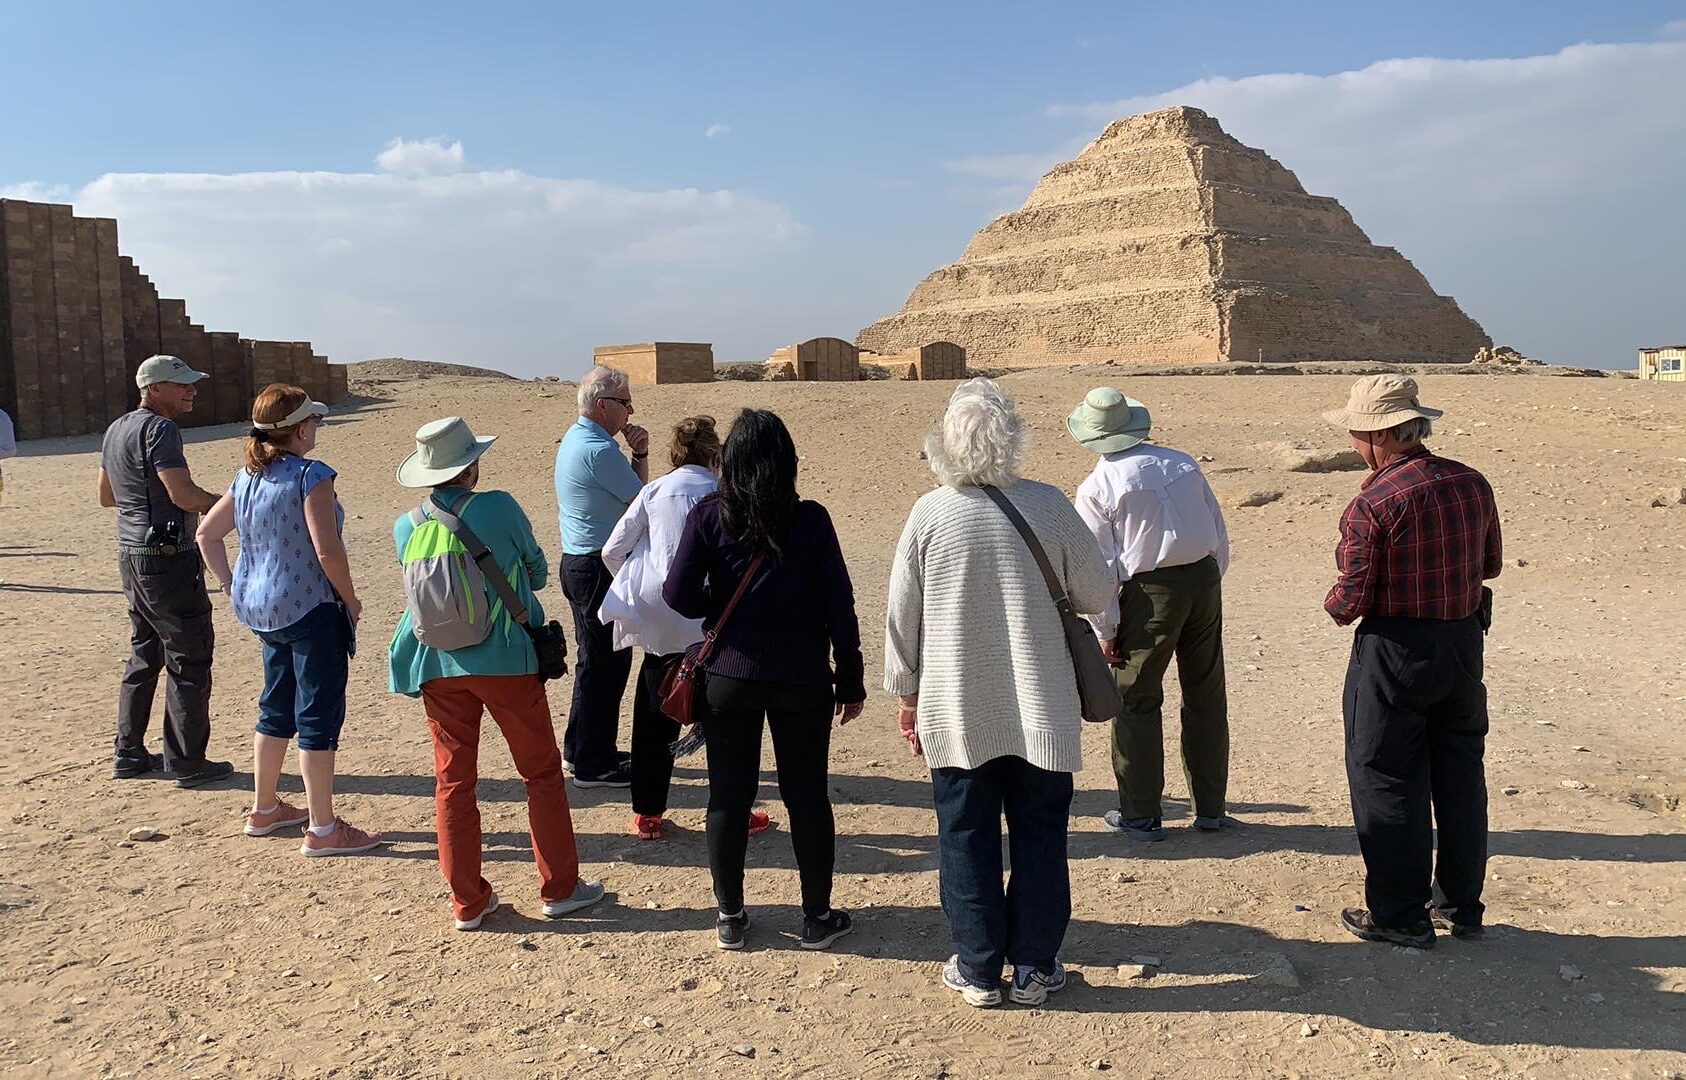 Alumni looking at a pyramid in Egypt